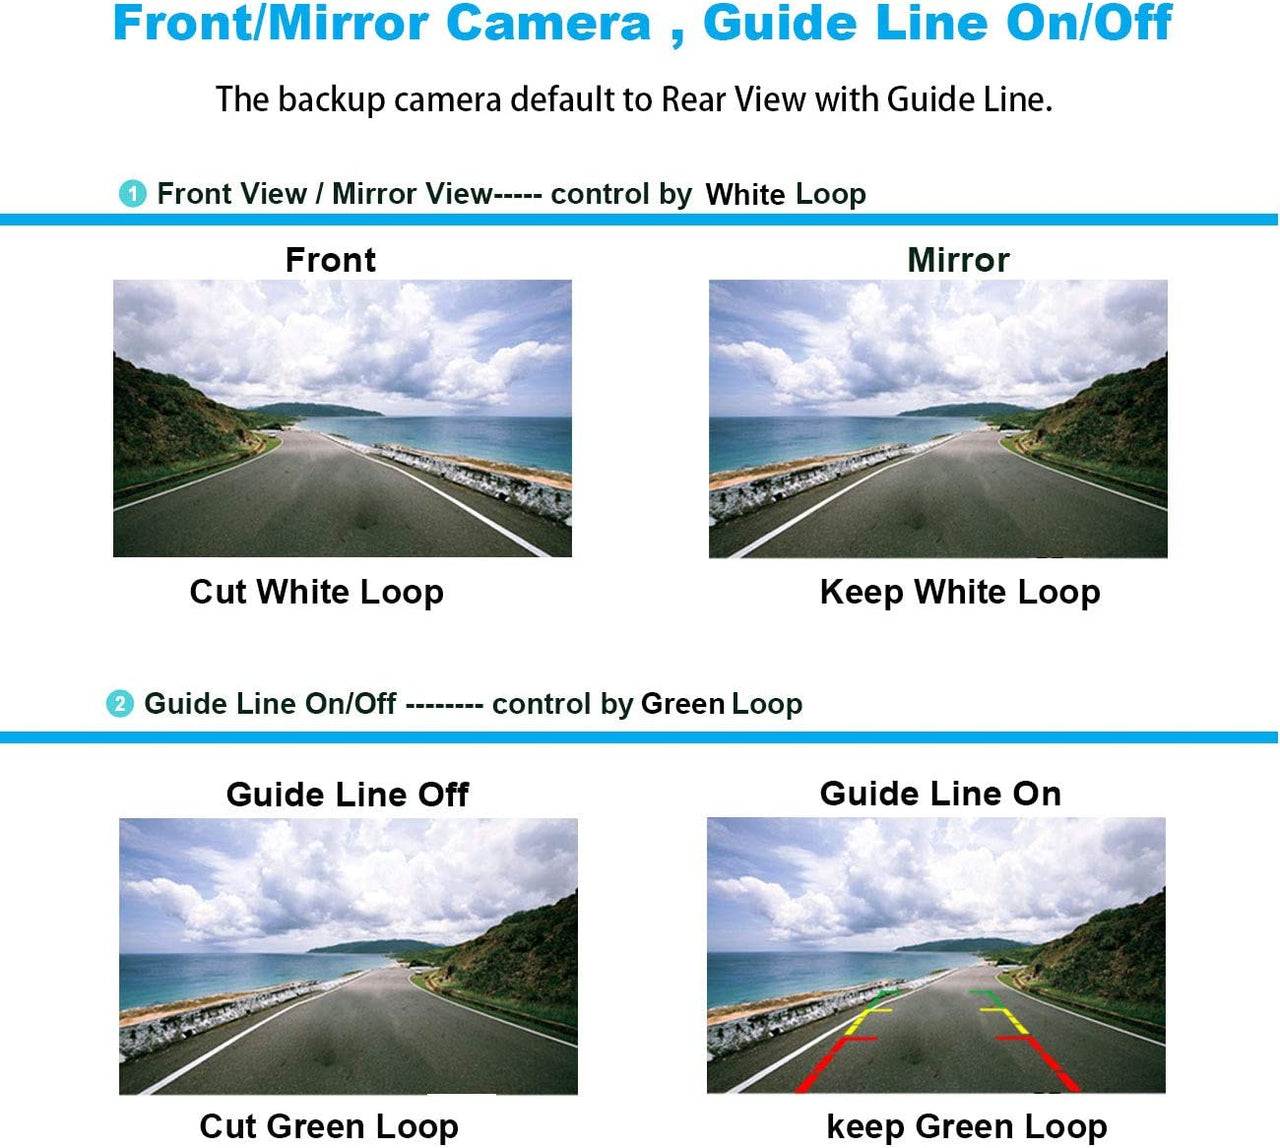 Universal Slim Chrome License Plate HD Camera with Wide Viewing Angle